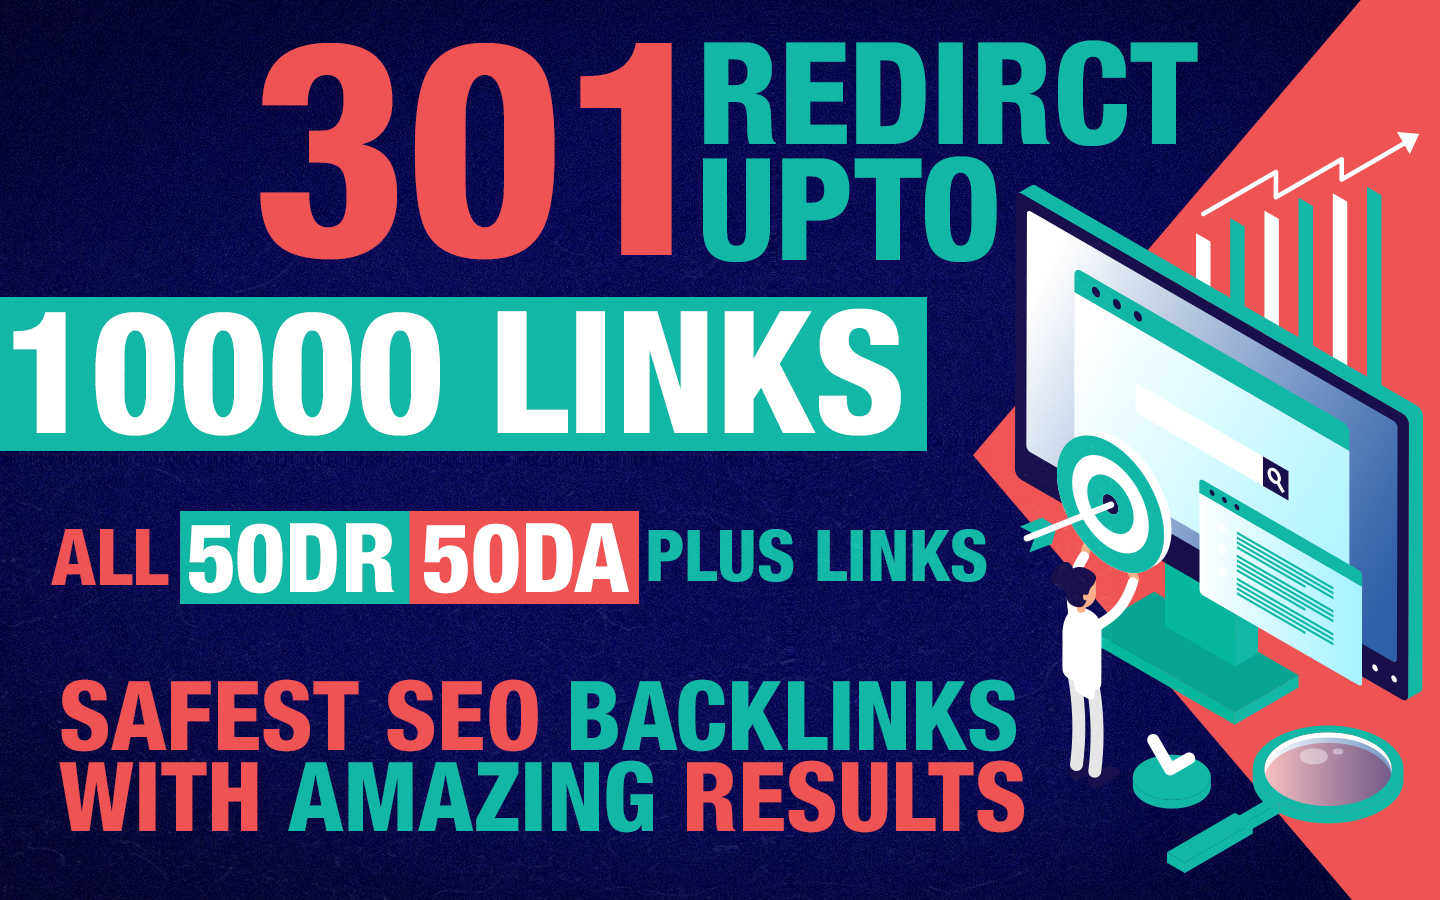 all 60DR 60DA + 10000 301 Redirect links Boosting you Rankings to SKY 